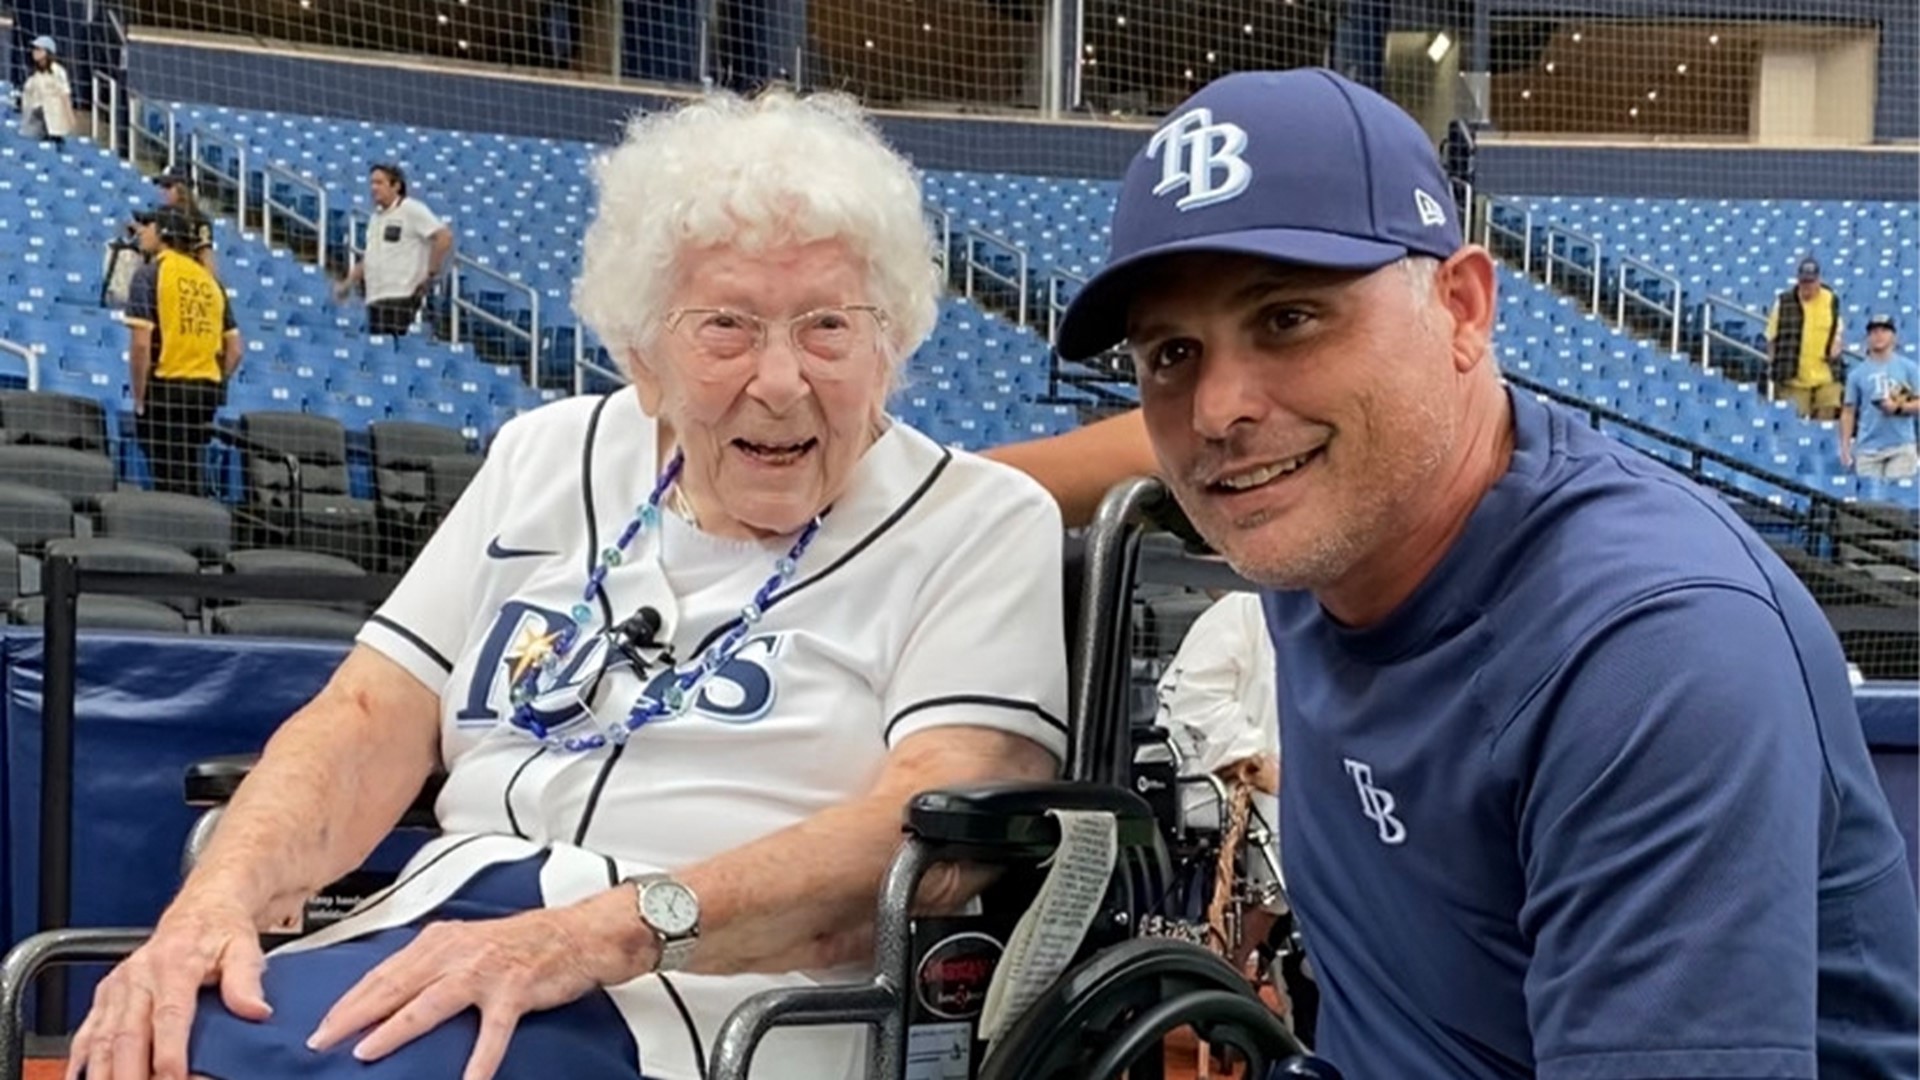 At 106 years young, Agnes Ingles may be the longest-living Rays fan, and she just had the time of her life watching a winner at Tropicana Field.